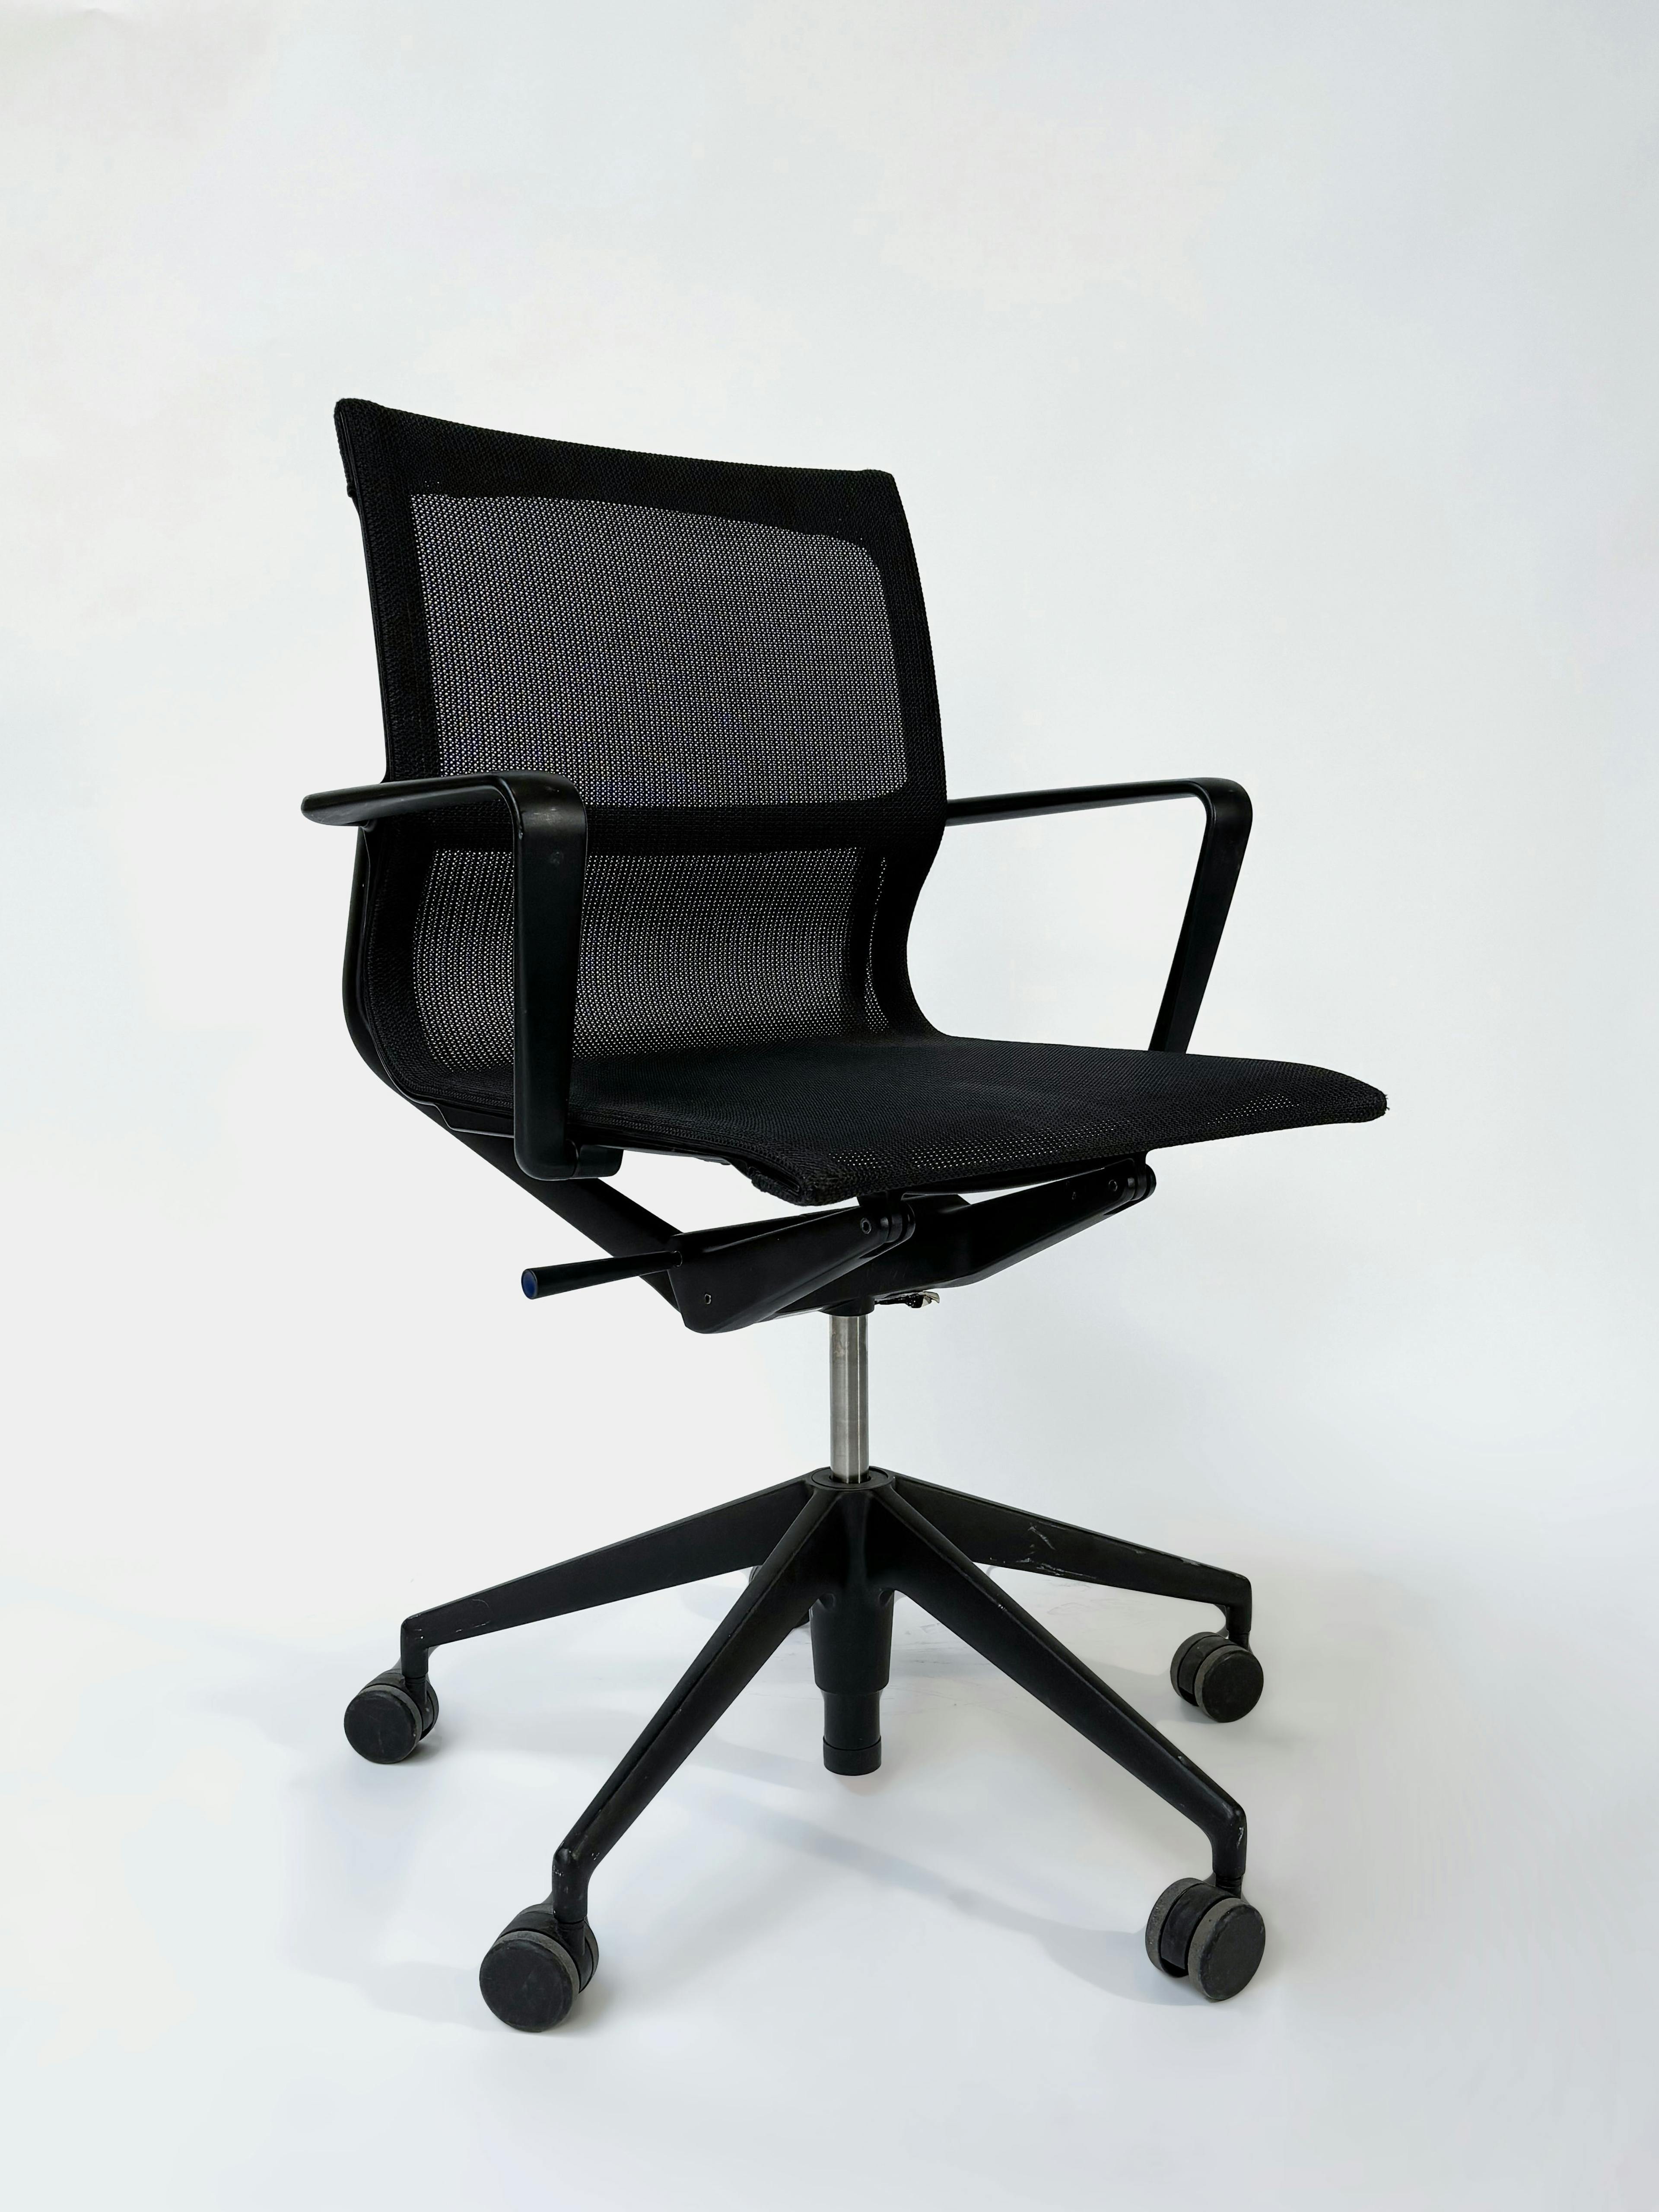 VITRA Physix black mesh office chair - Relieve Furniture